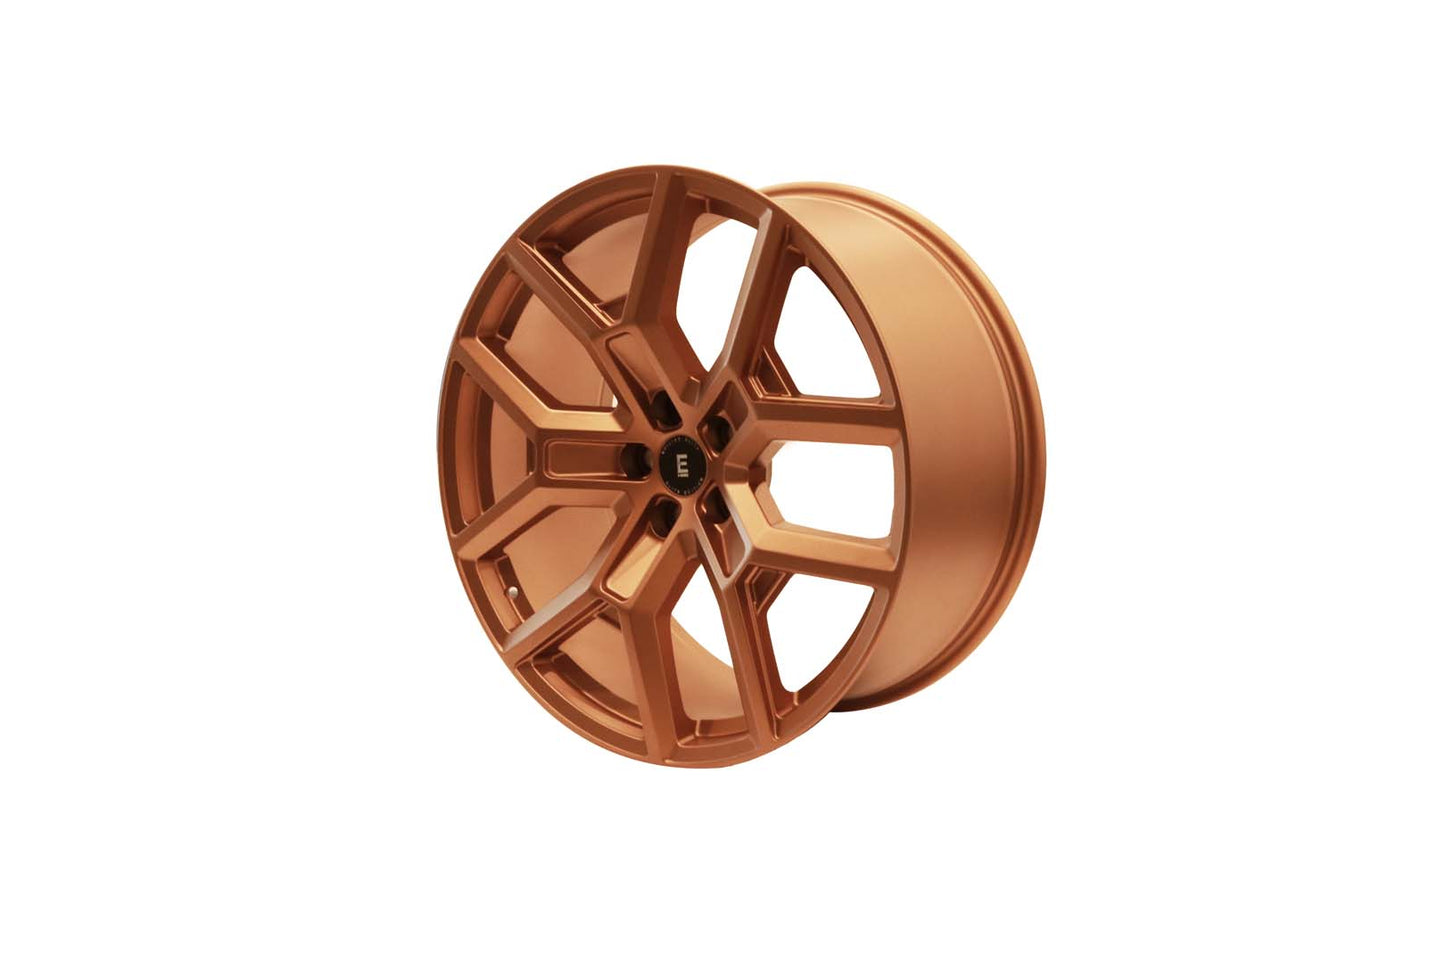 22 INCH ELITE EDITION ALLOY WHEEL FOR LAND ROVER - COPPER